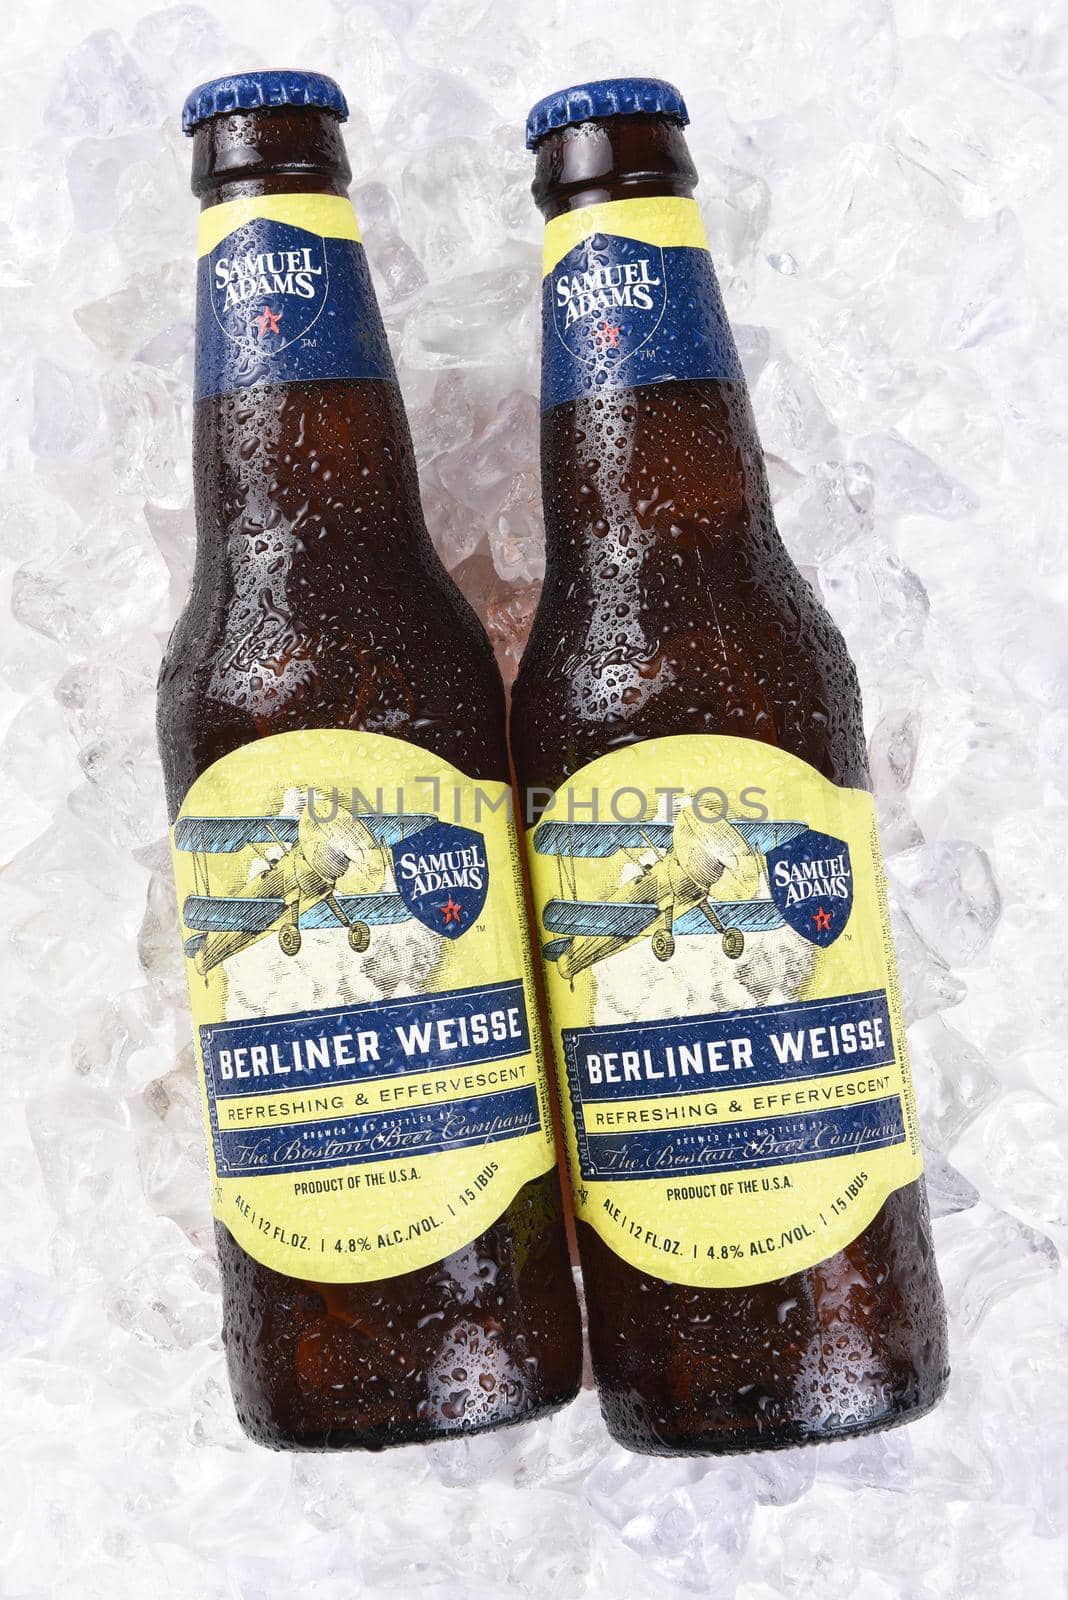 IRVINE, CA - JULY 16, 2017: Samuel Adams Berliner Weisse on ice. From the Boston Beer Company. Based on sales in 2016, it is the second largest craft brewery in the U.S.